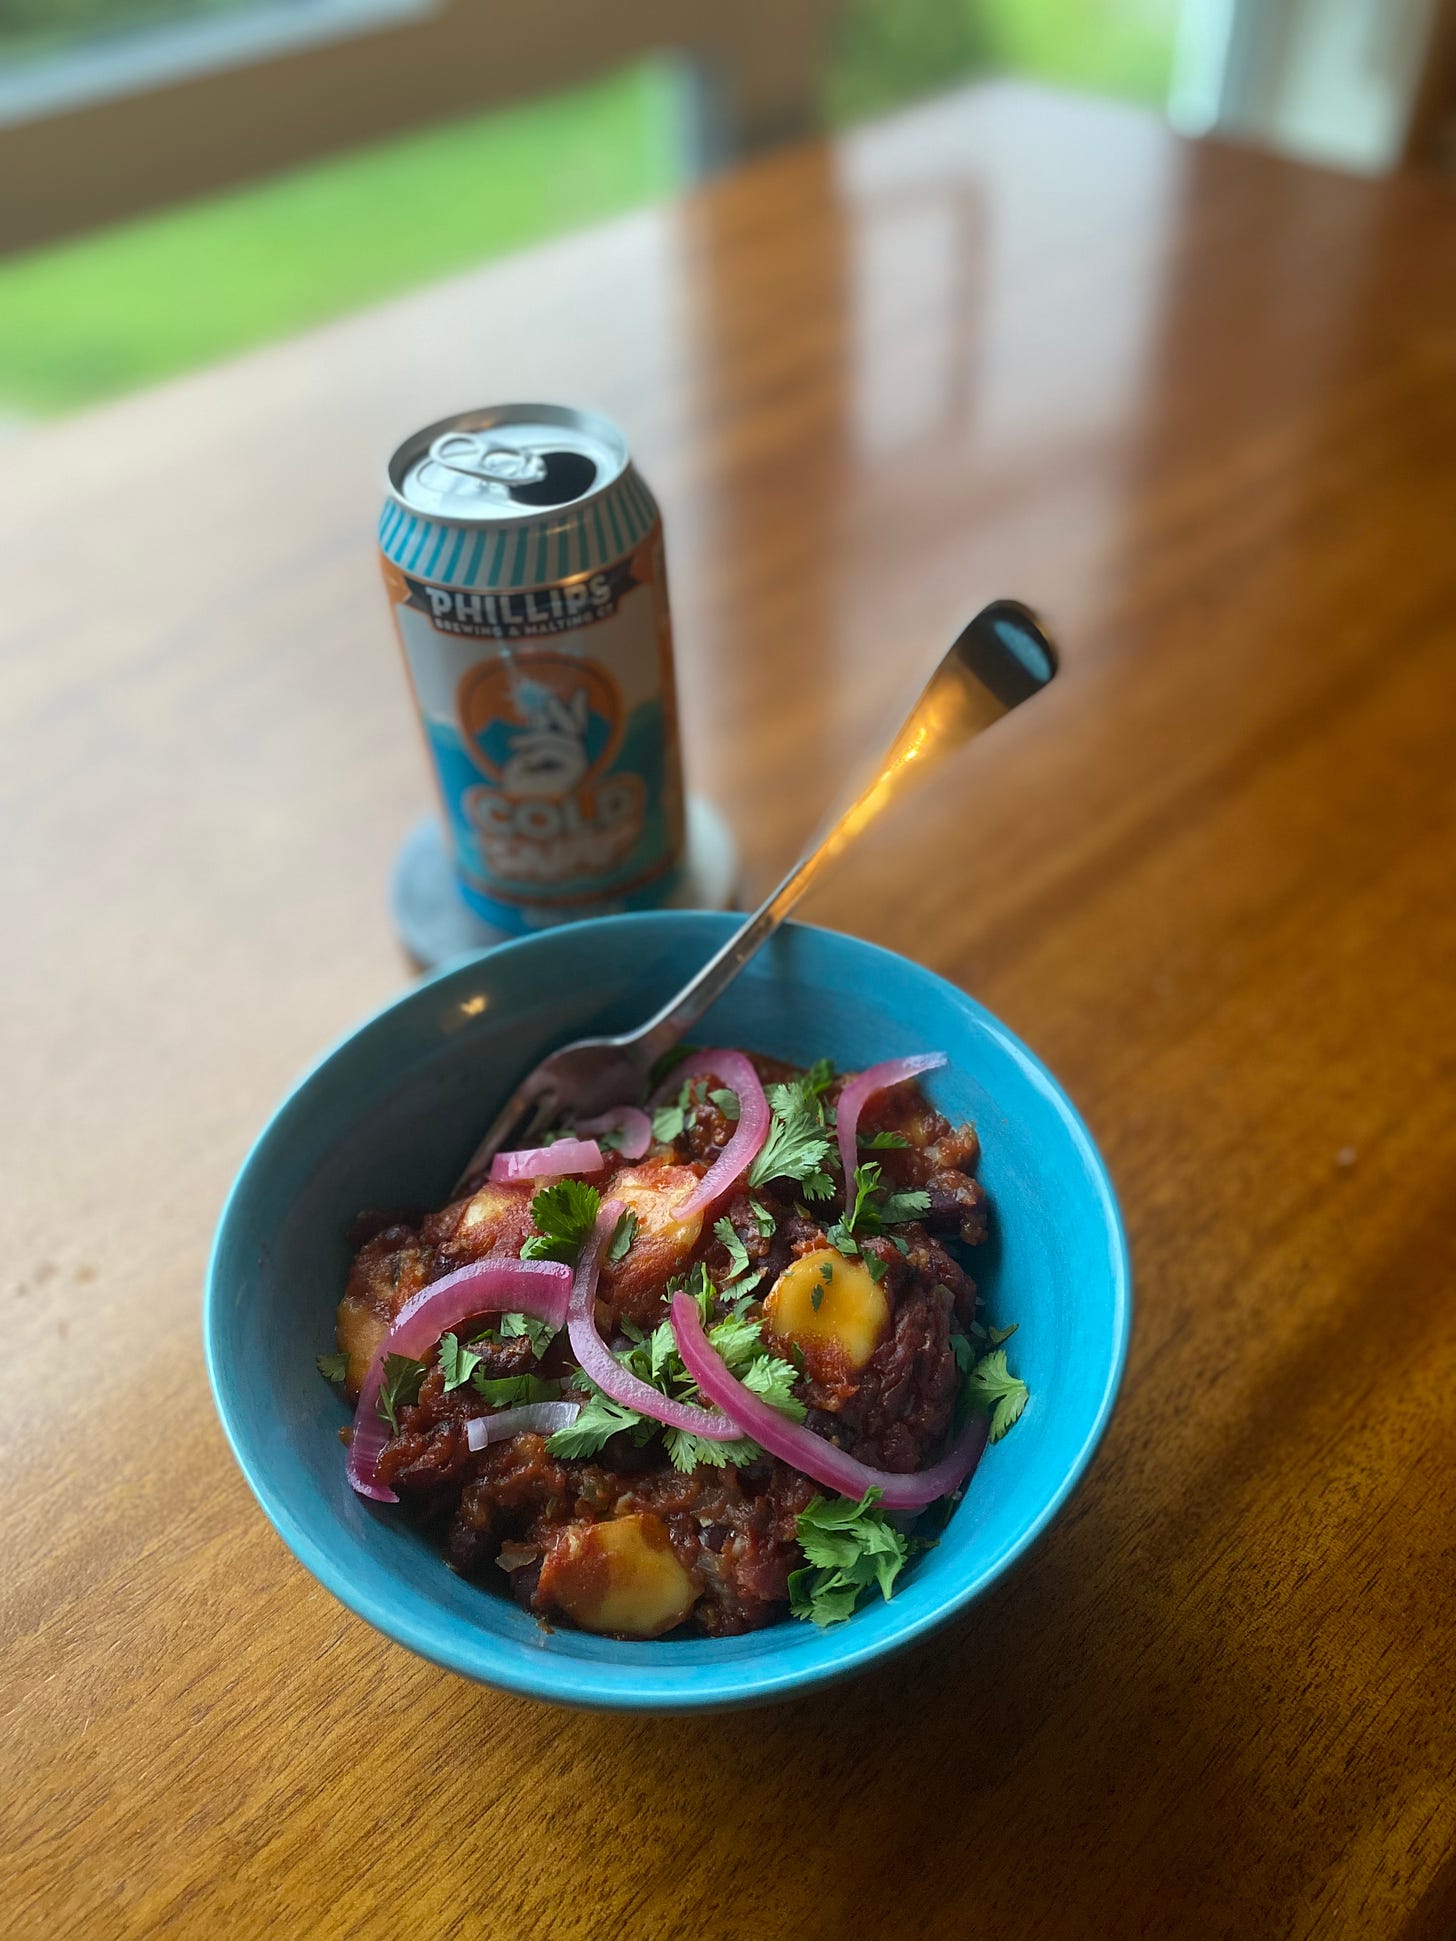 A blue bowl of the curry described above, deep red with pieces of mozza. Cilantro and pickled onion slices cover the top, and a fork sticks out at angle at the back. On a coaster behind it is a can of Phillips Cold Snap kolsch.